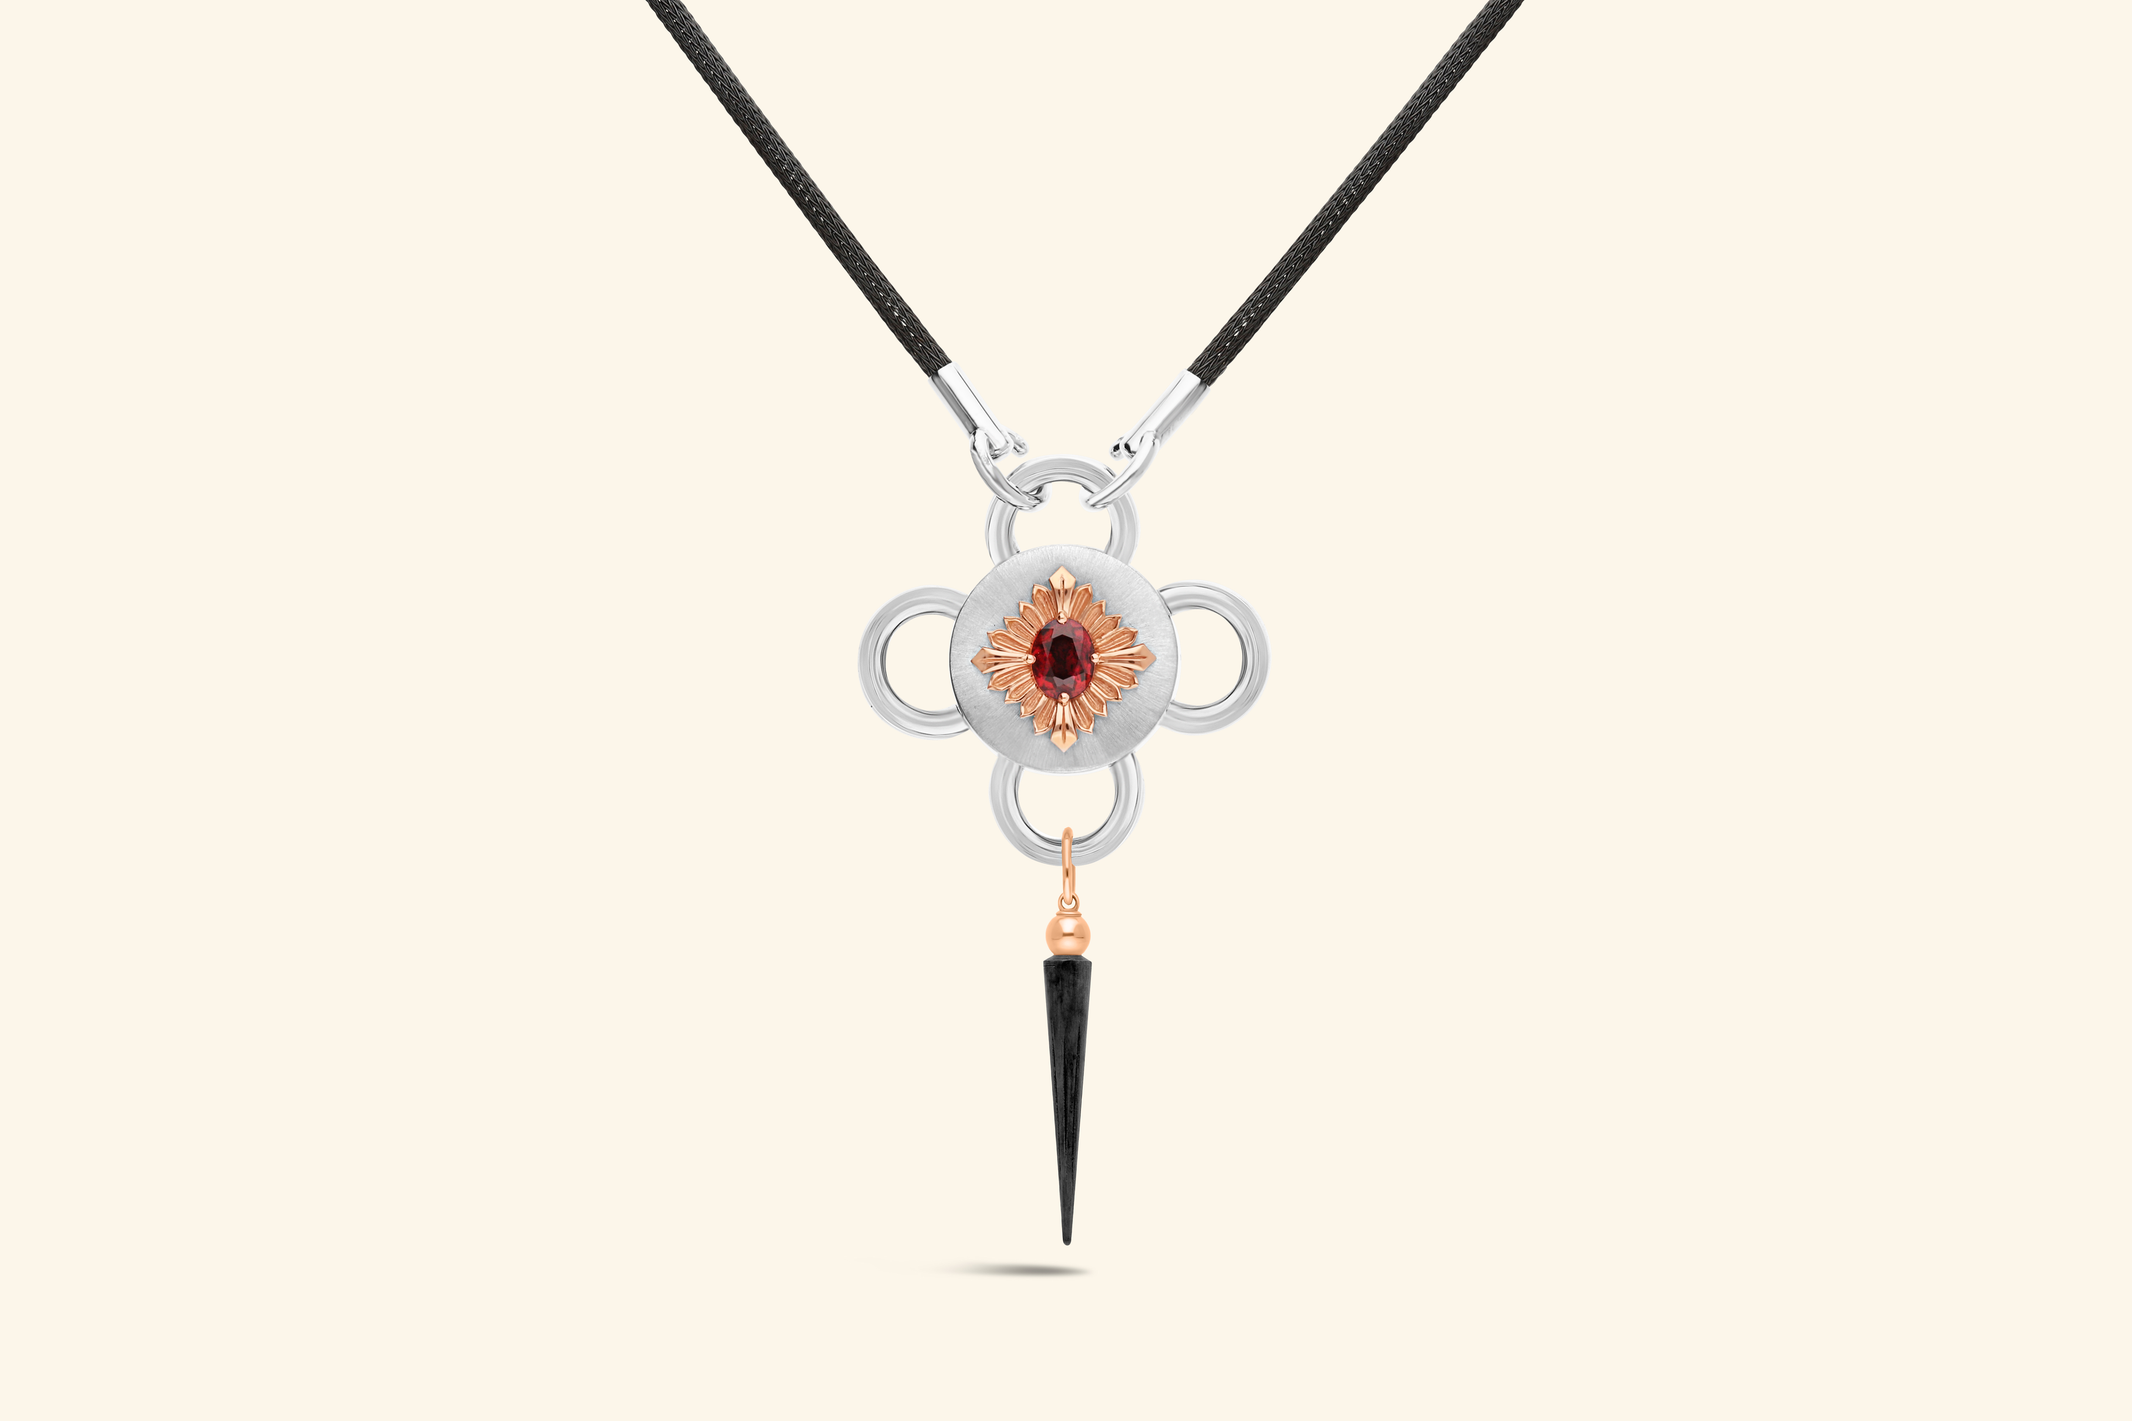 Bolt necklaceA ~1.79-carat rubellite set with a polished rose gold flower on a satin-finish silver disk . A tassel in rose gold and blackened silver. Knitted chain in blackened silver.